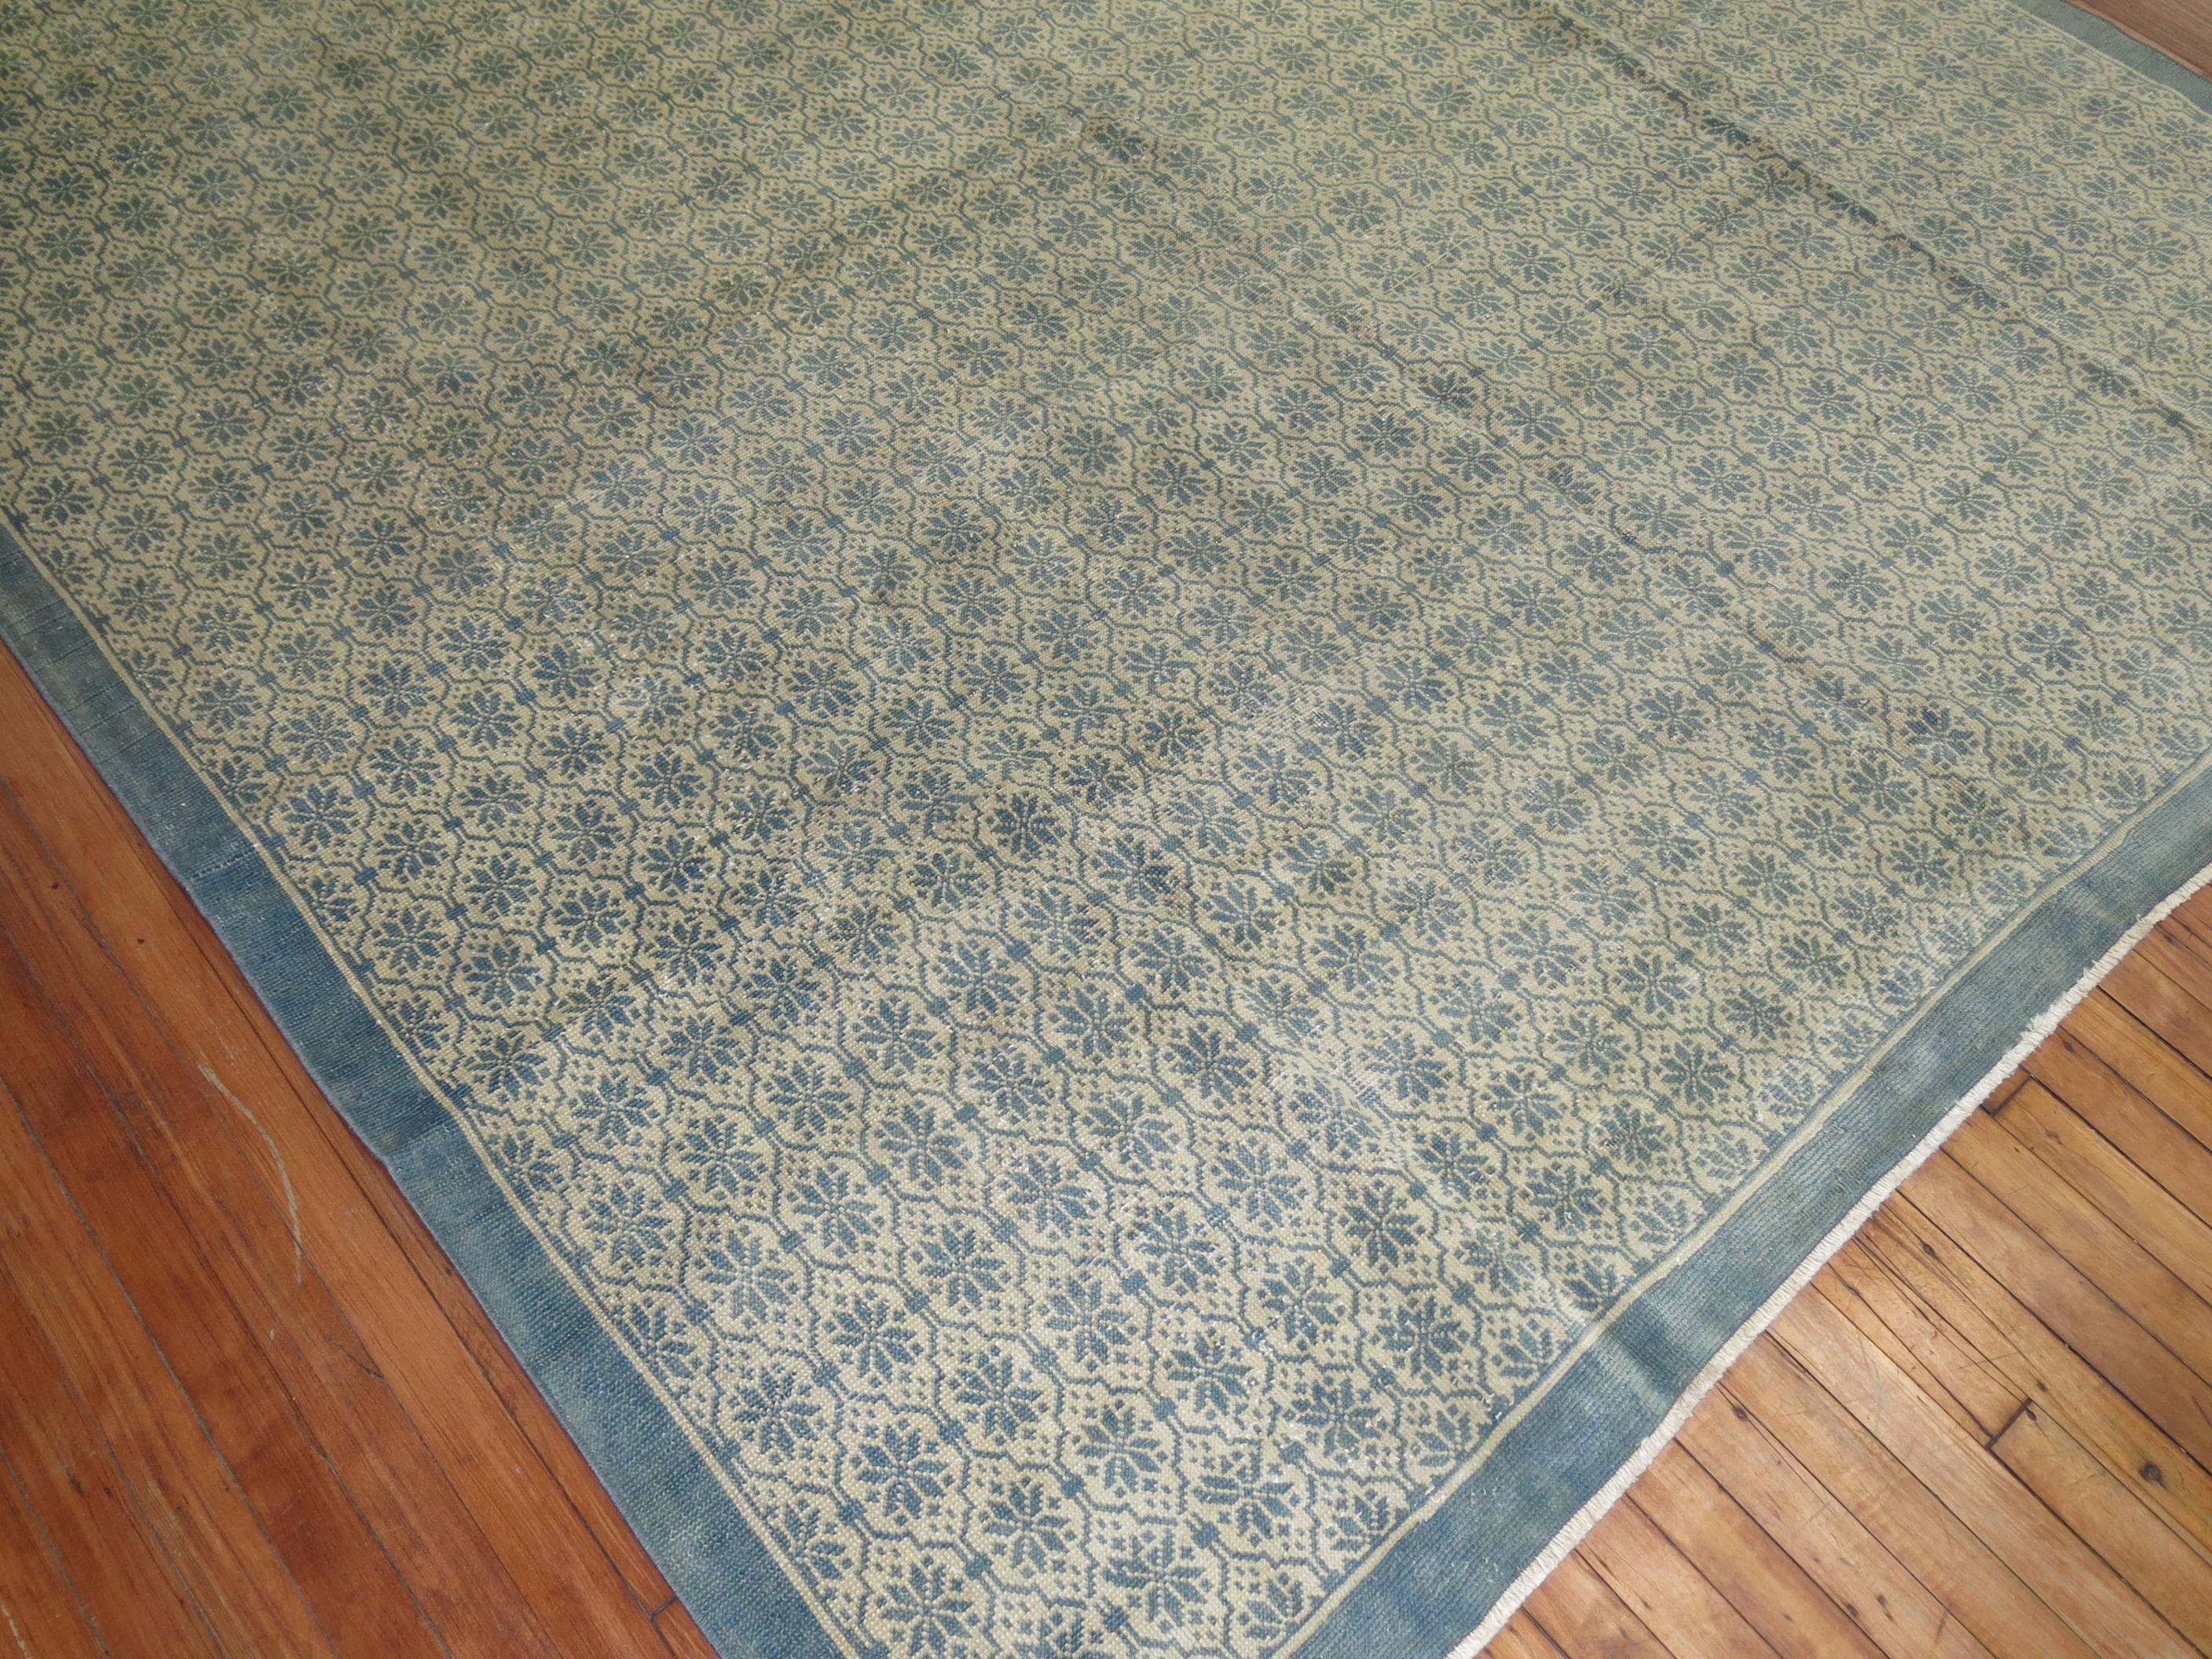 Vintage Turkish Rug in Clear Blues and White 1